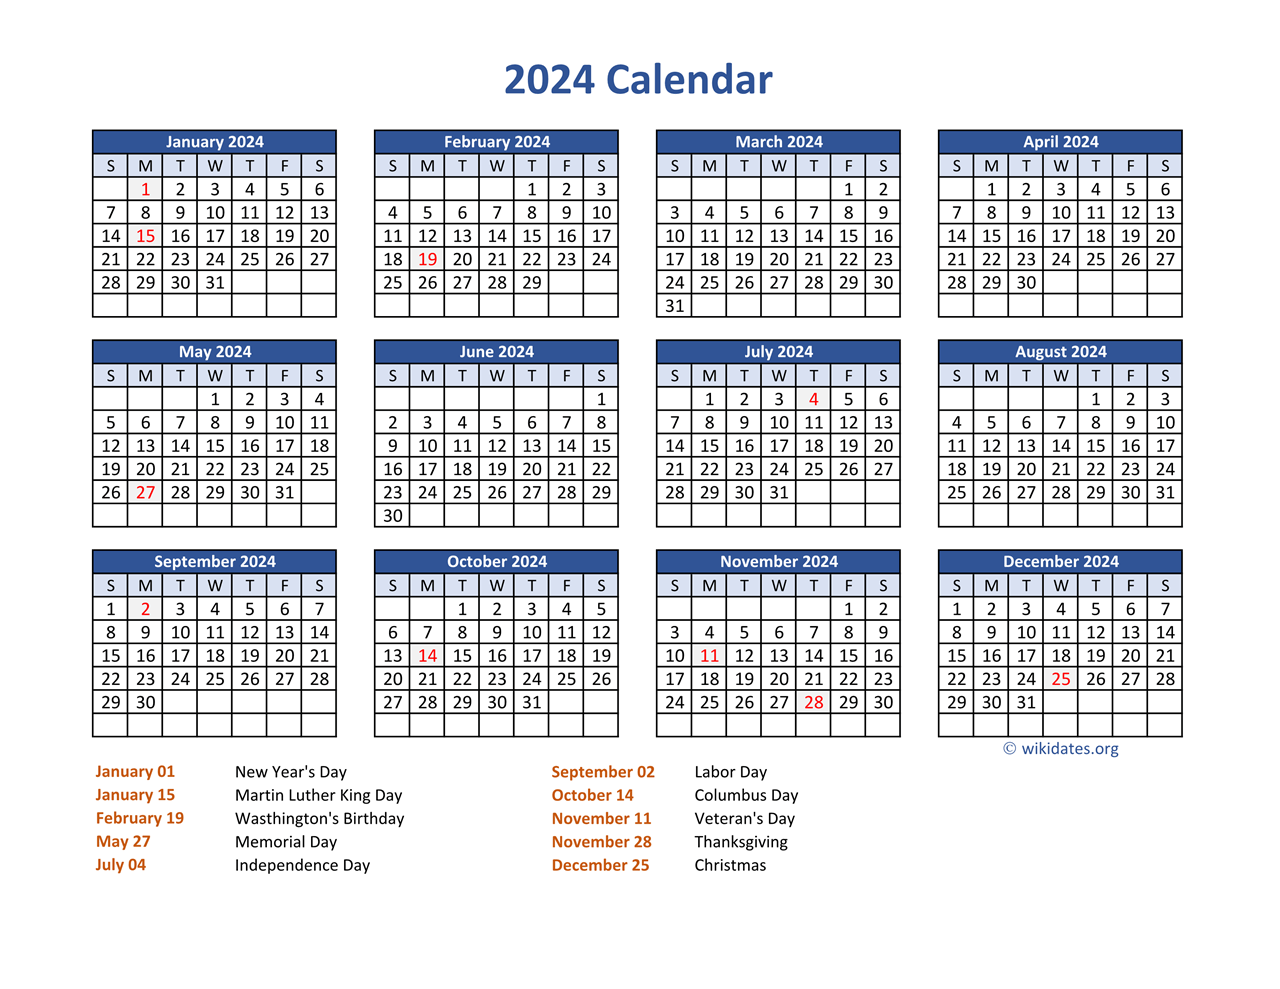 Pdf Calendar 2024 With Federal Holidays | Wikidates for 2024 Printable Year Calendar With Holidays